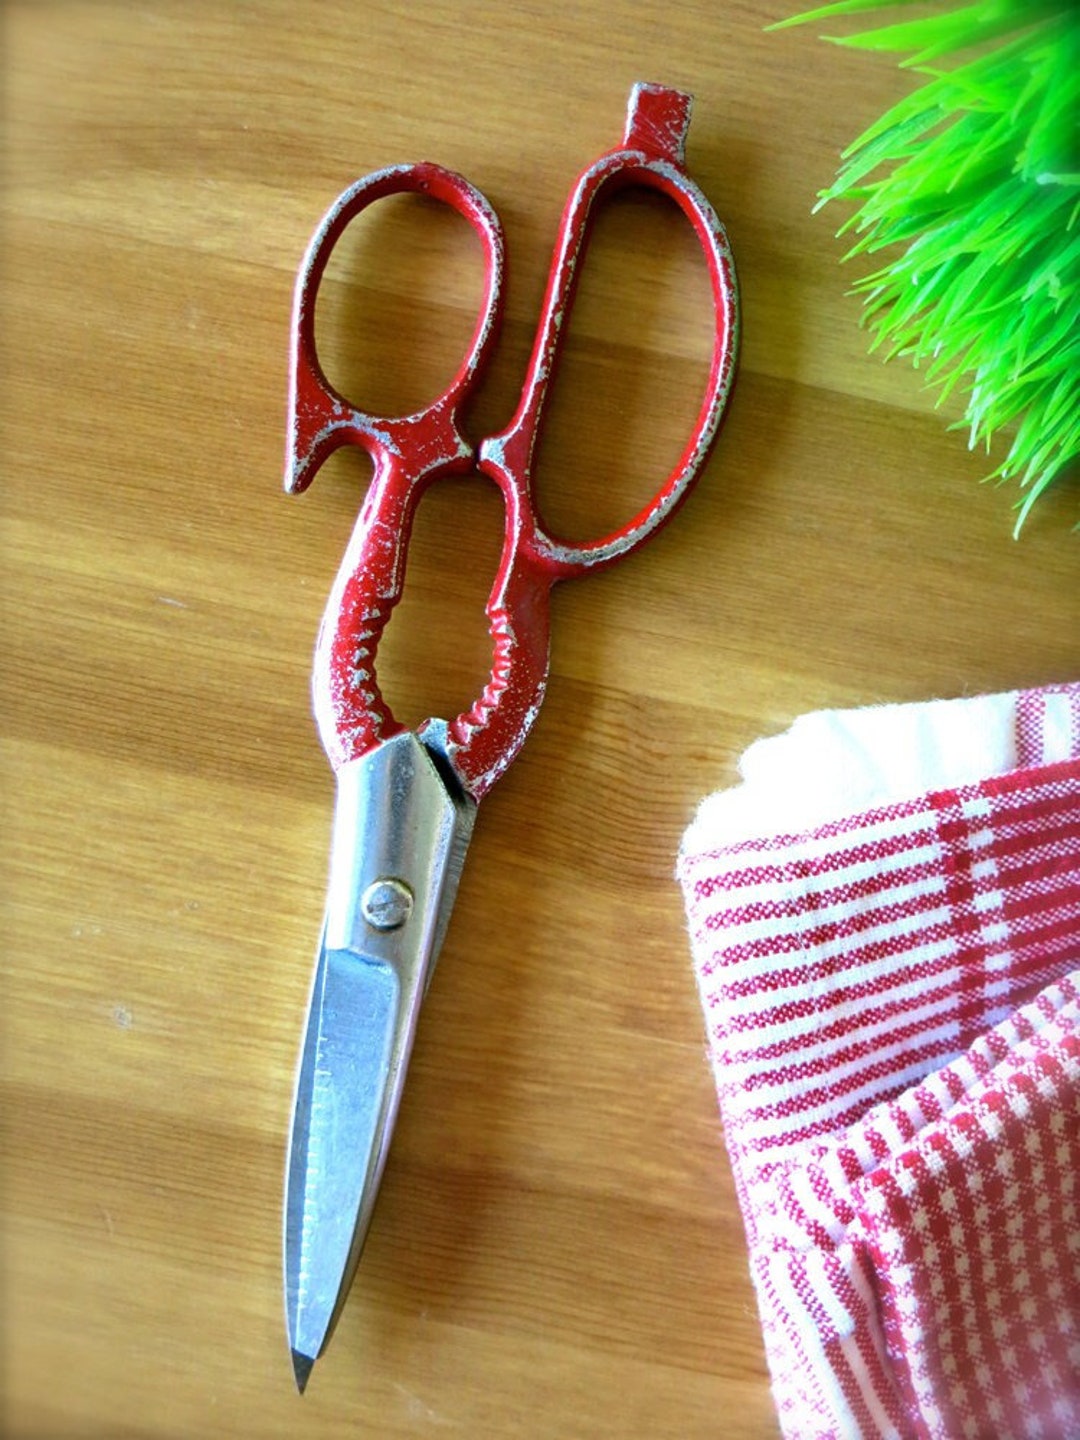 Vintage Red Handled Kitchen Utility Scissors/Shears with Bottle Opener